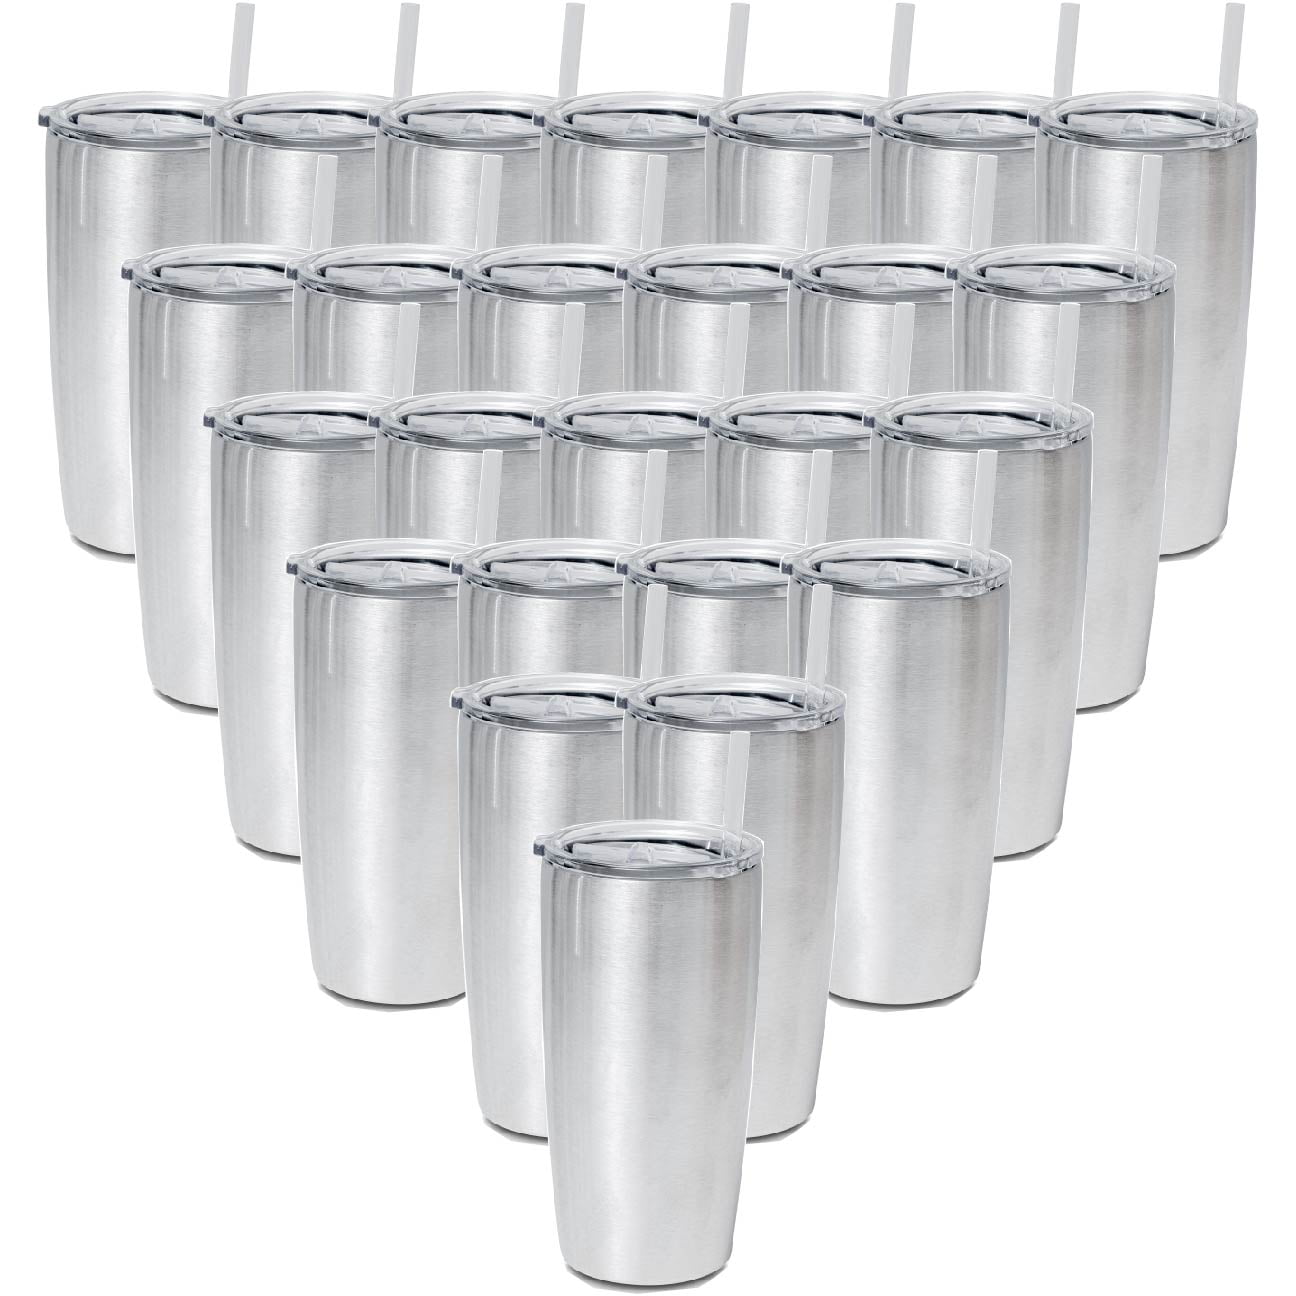 Case of 25 - 20oz Tumblers, Stainless Steel Coffee Mug, Double Wall Bulk Stainless Steel Tumblers Cheap